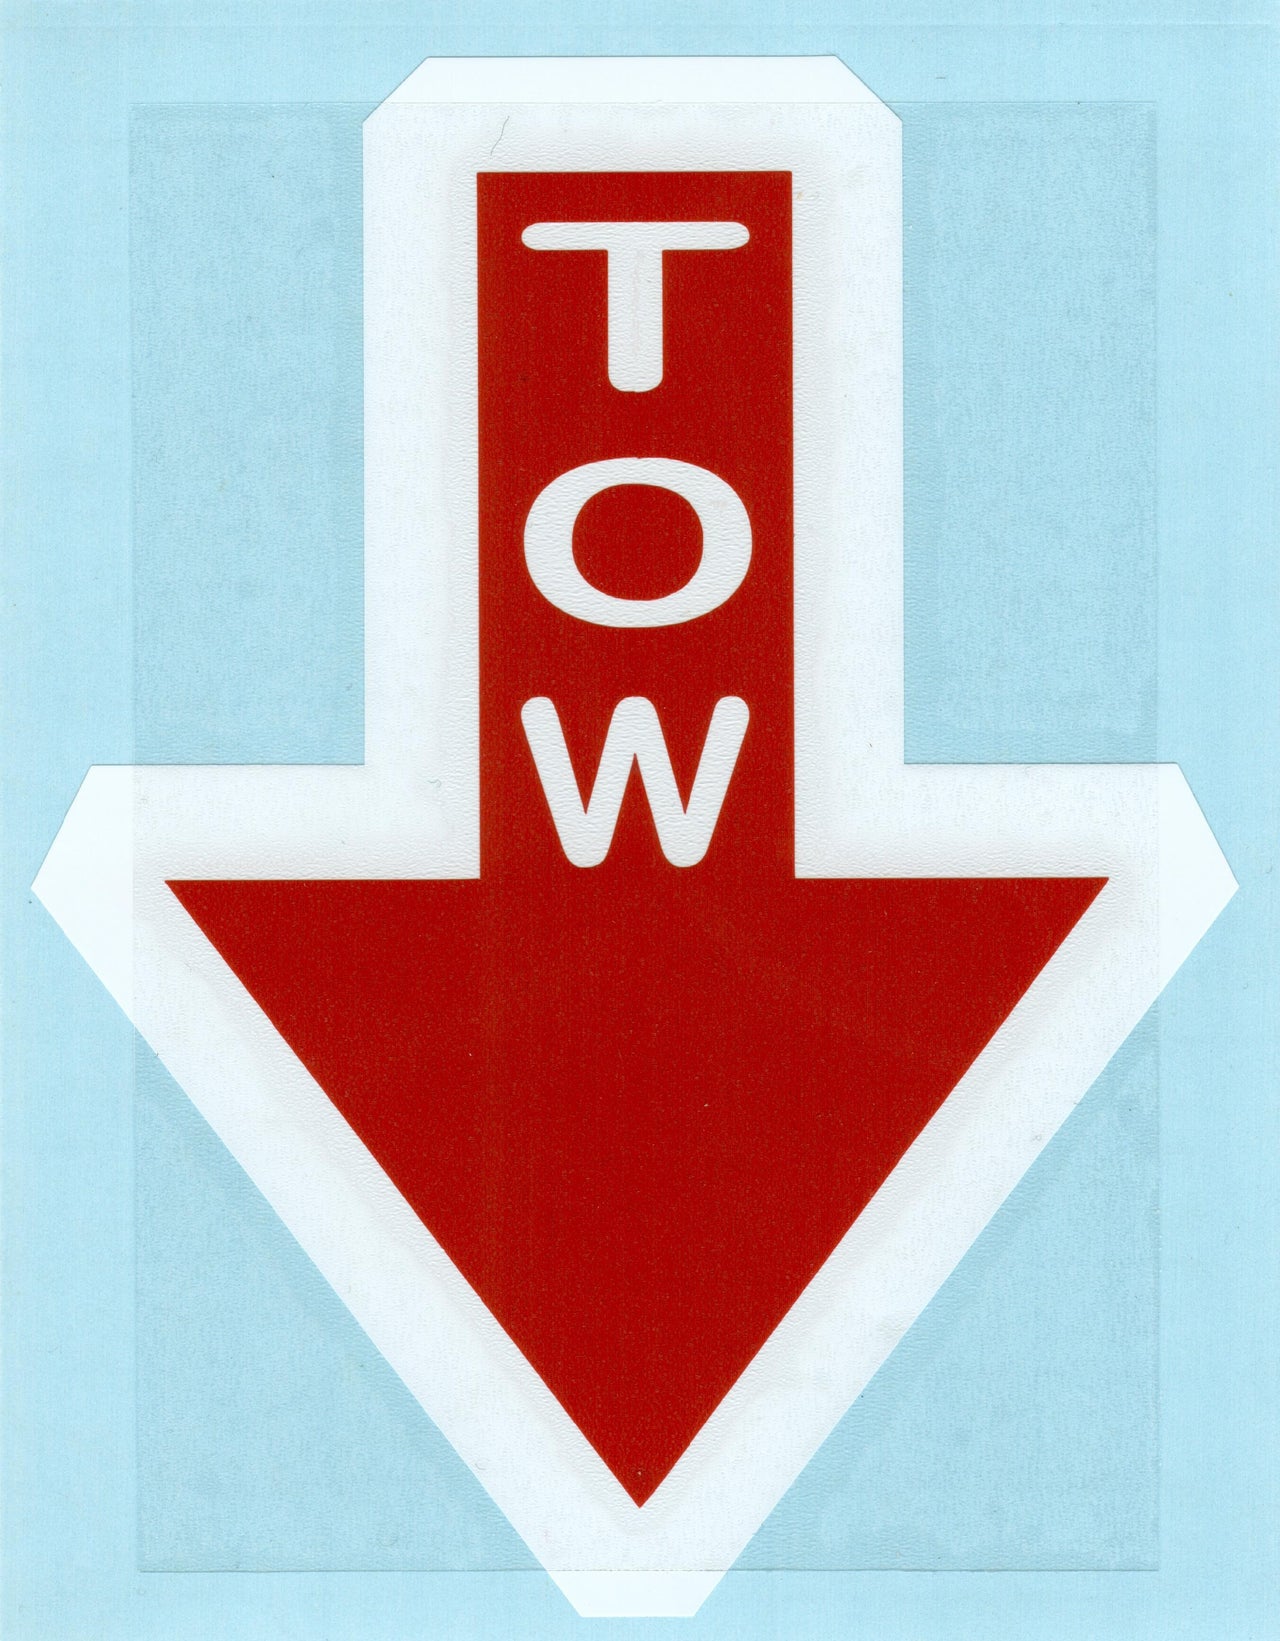 Tow Decal - Red on White